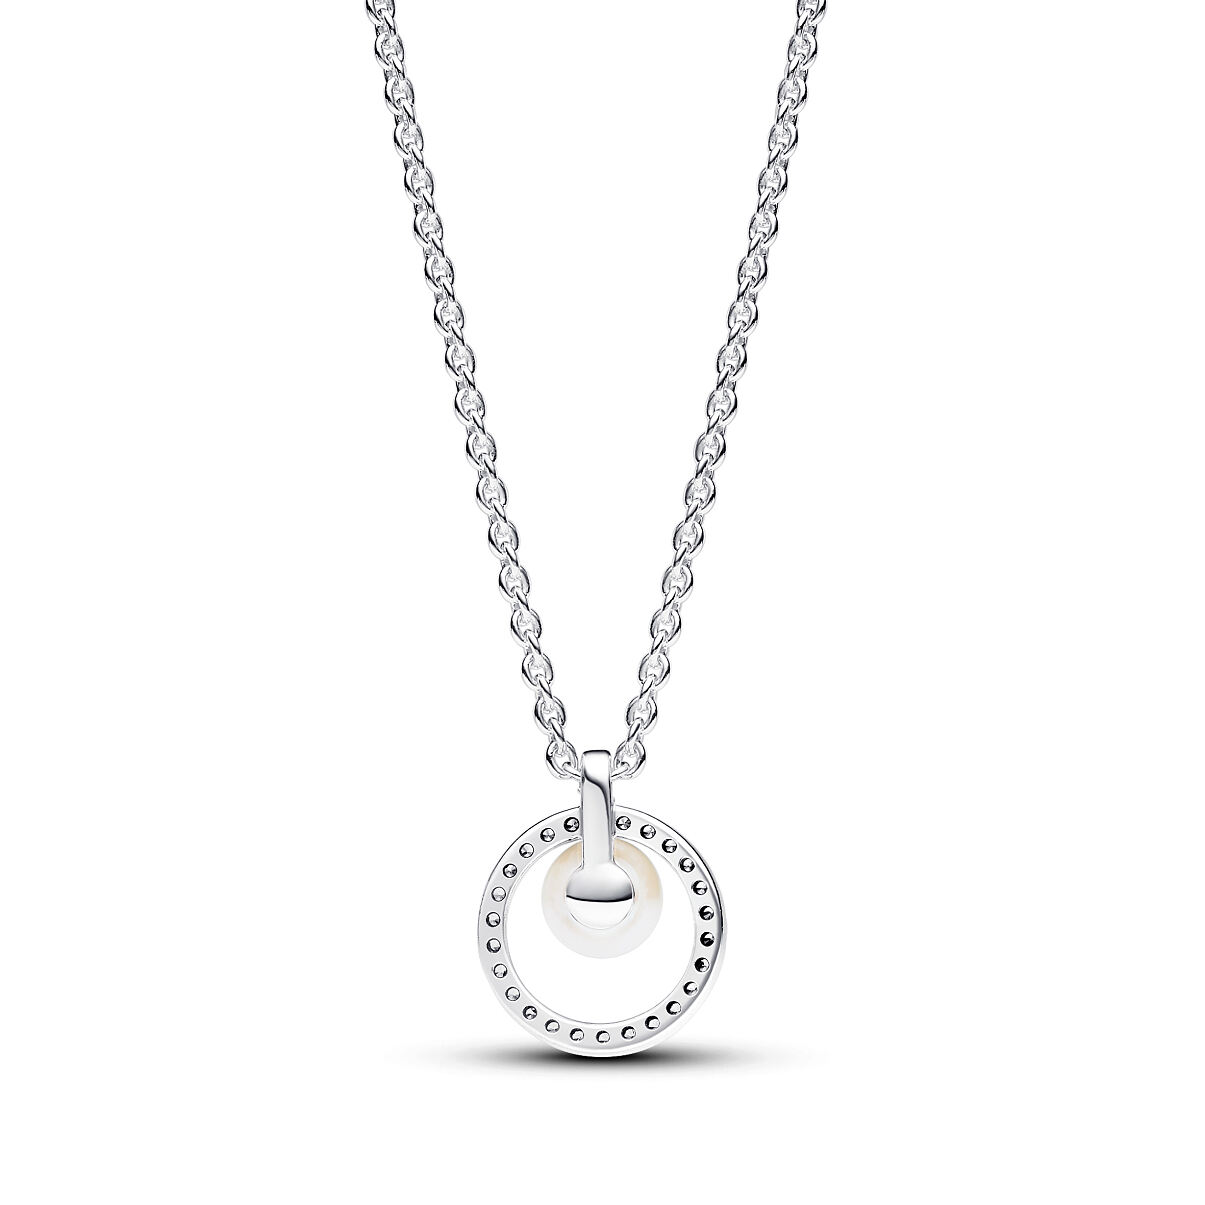 Pandora_Necklace_Sterling Silver_Freshwater Pearls_Cubic Zirconia_393165C01_99,00 Euro (3)